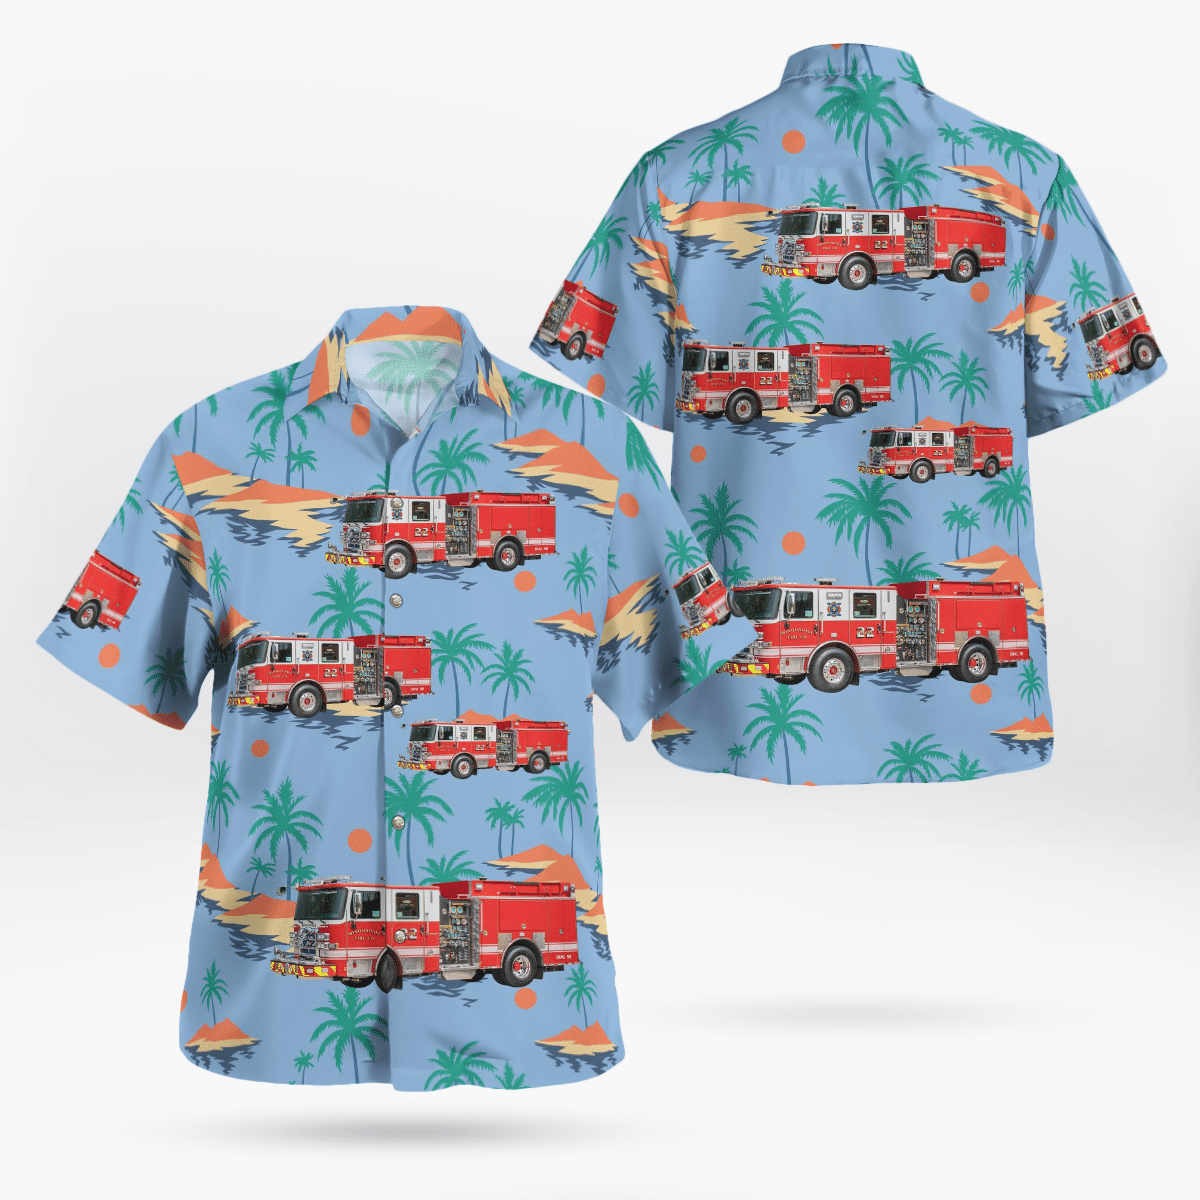 If you are in need of a new summertime look, pick up this Hawaiian shirt 257